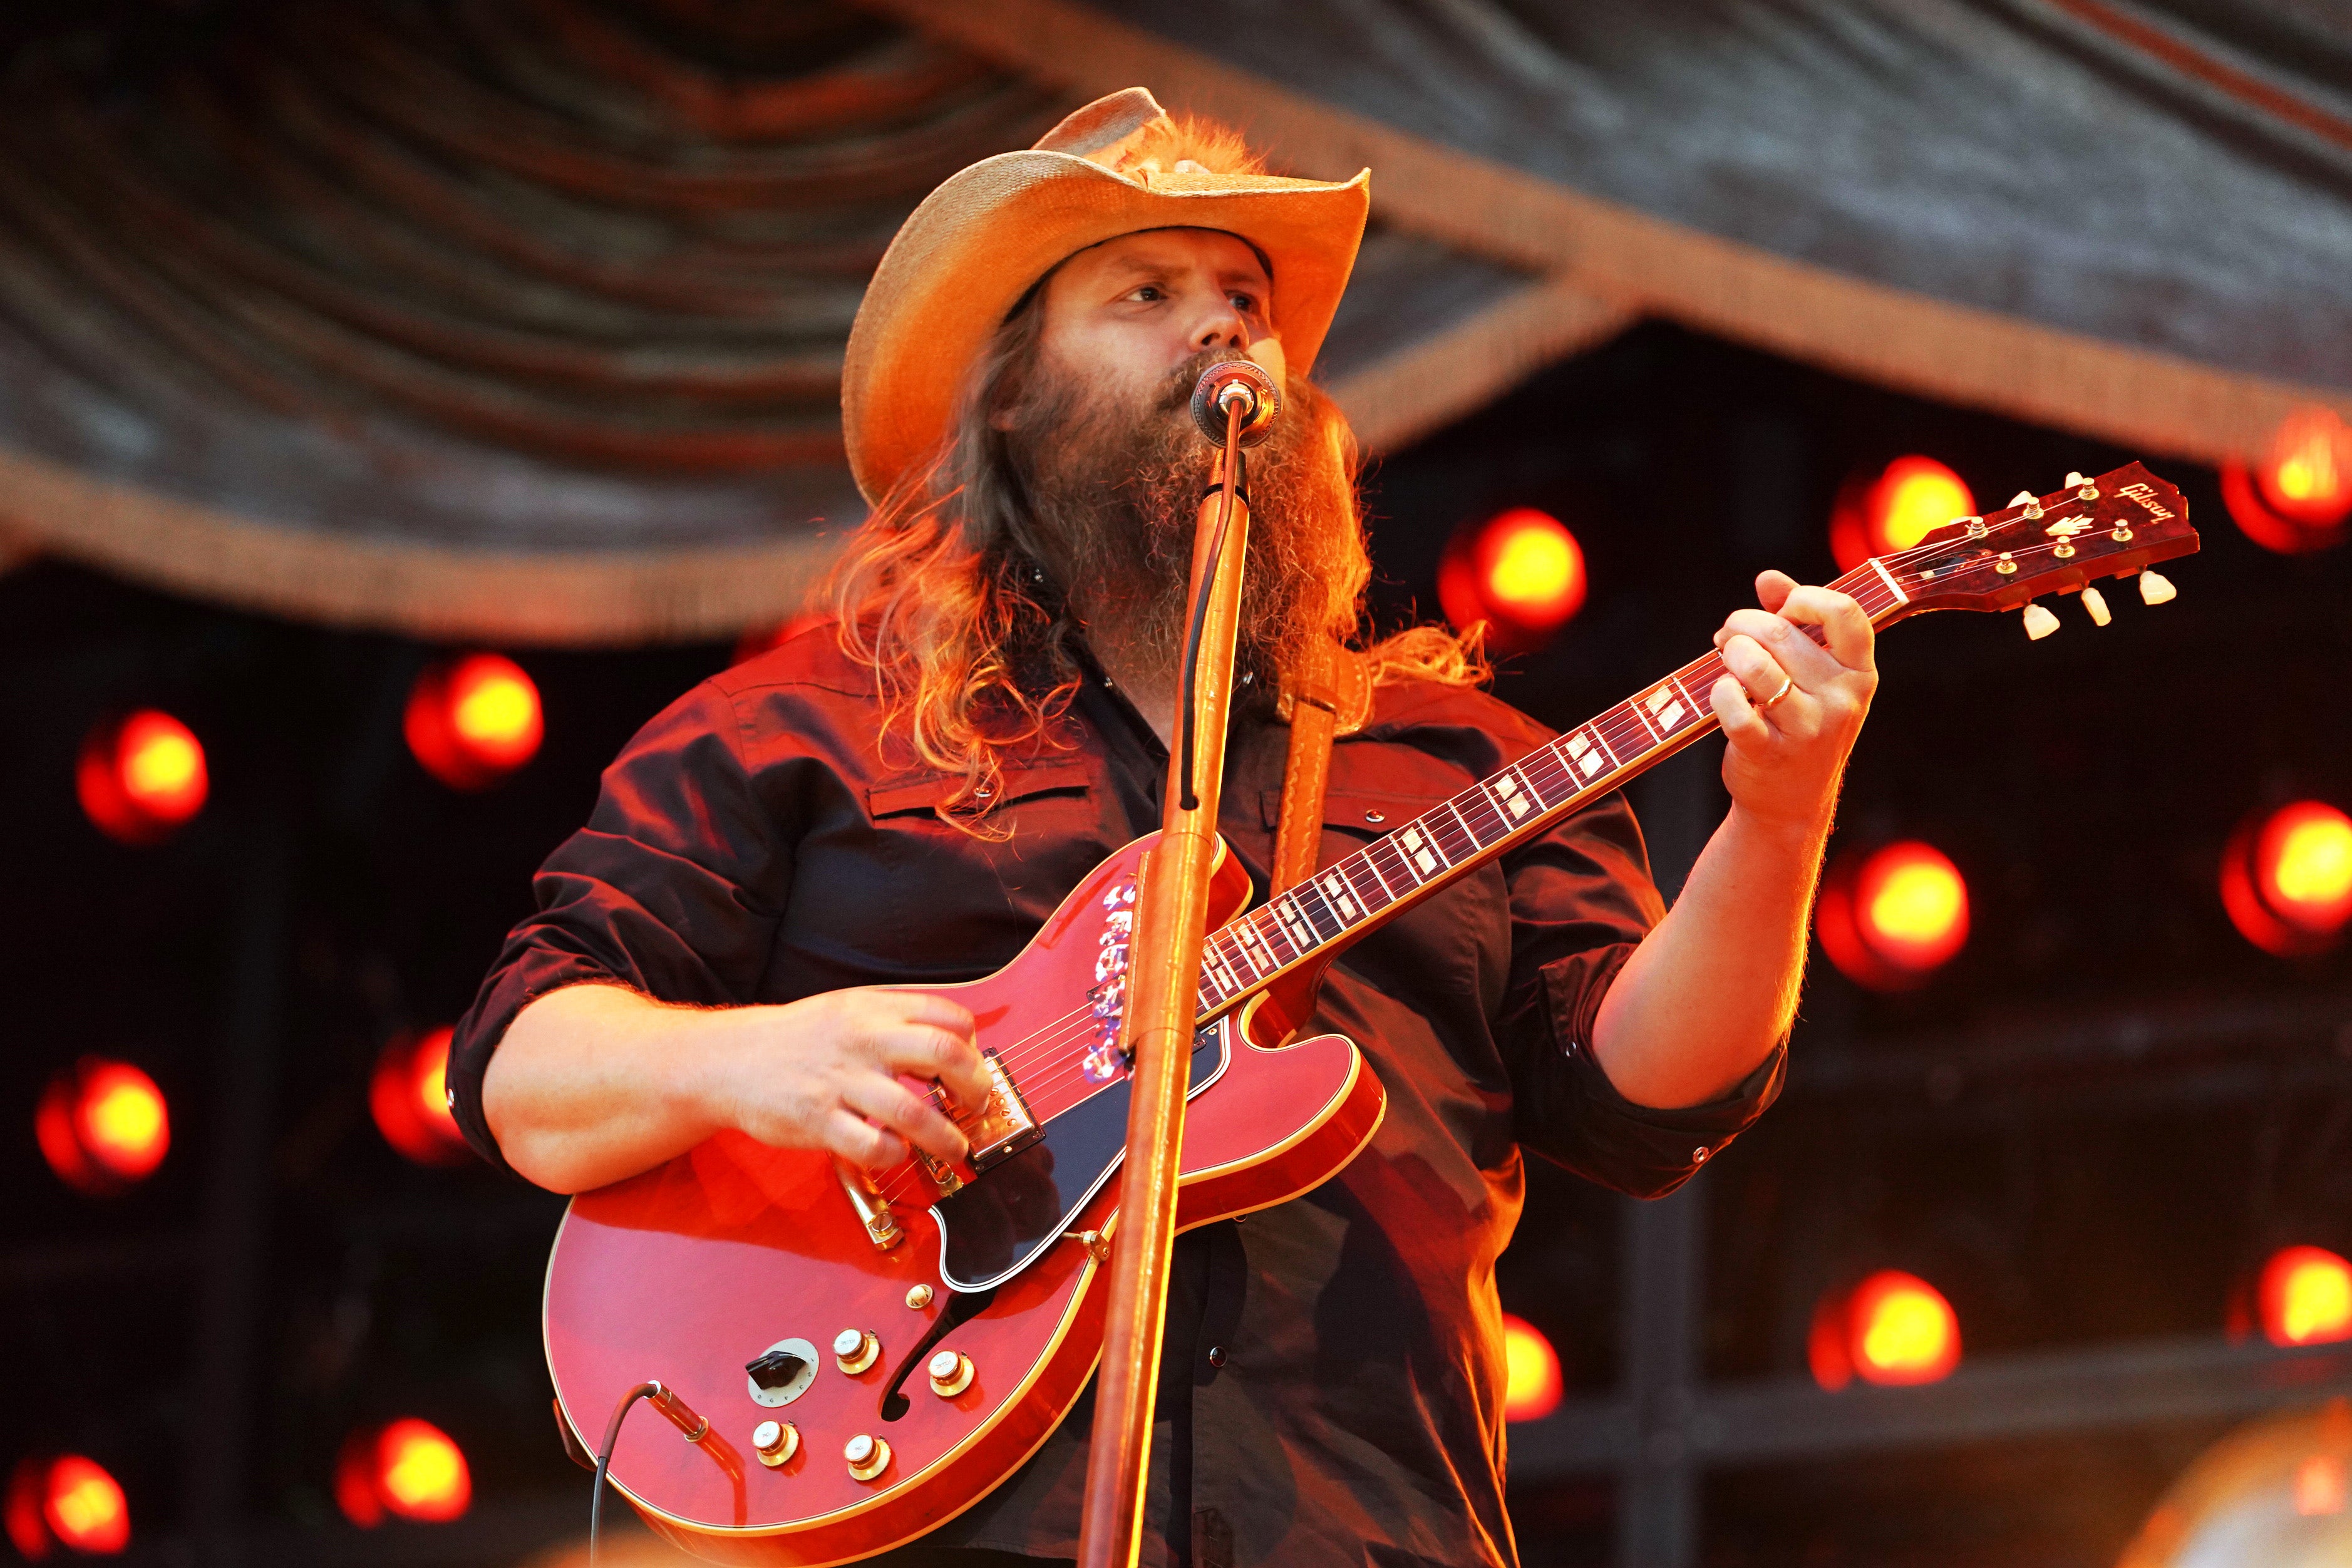 Chris Stapleton cancels multiple shows due to illness: ‘Unable to perform’